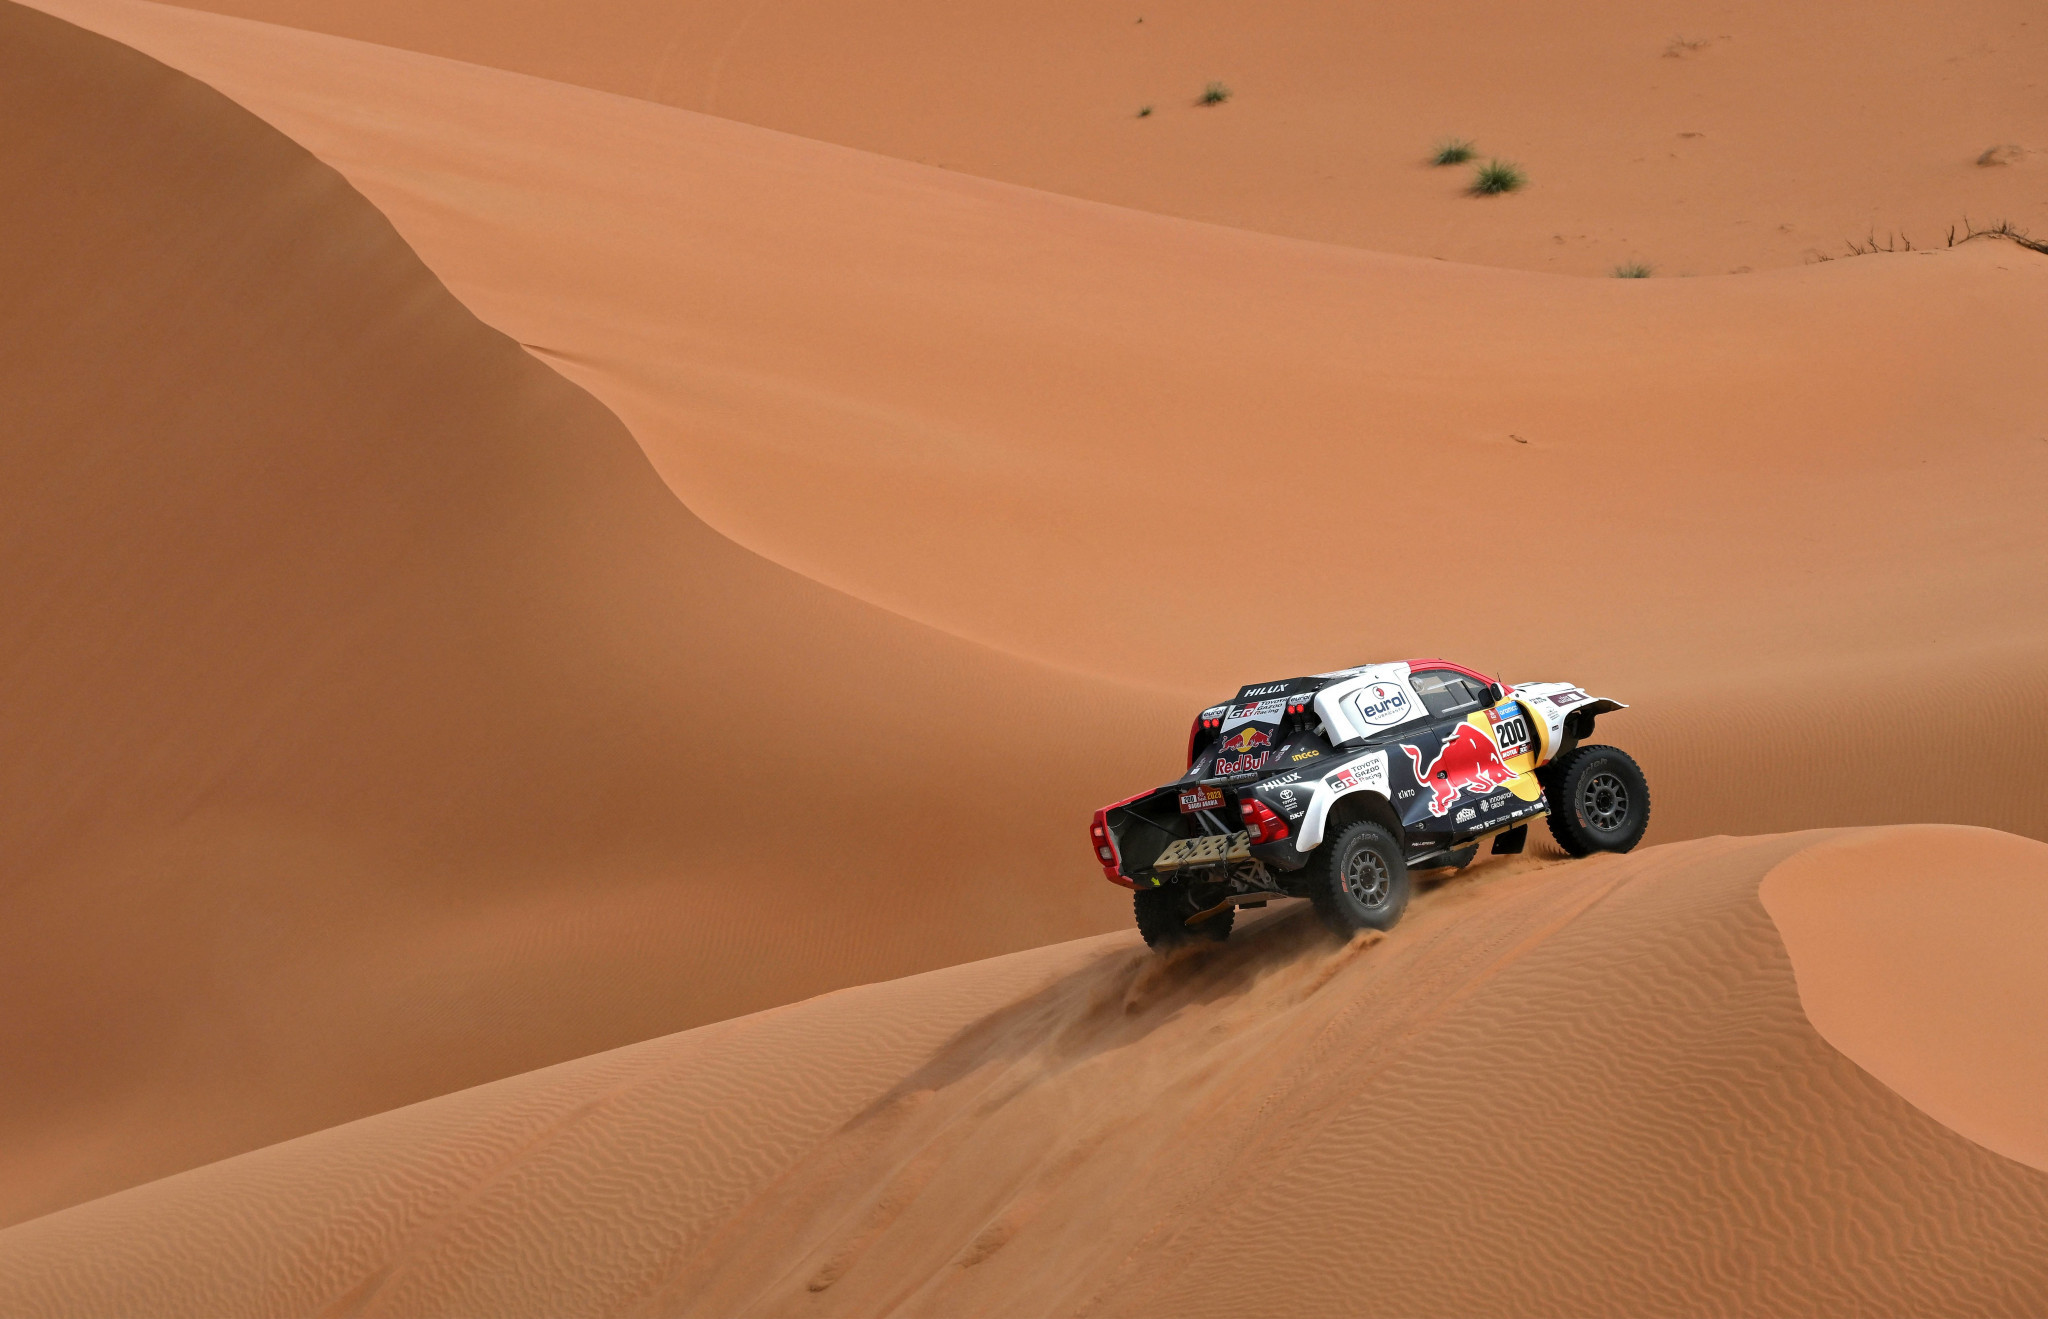 Nasser Saleh Al-Attiyah chalked up a fifth Dakar Rally victory in Saudi Arabia this year with French co-driver Mathieu Baumel ©Getty Images